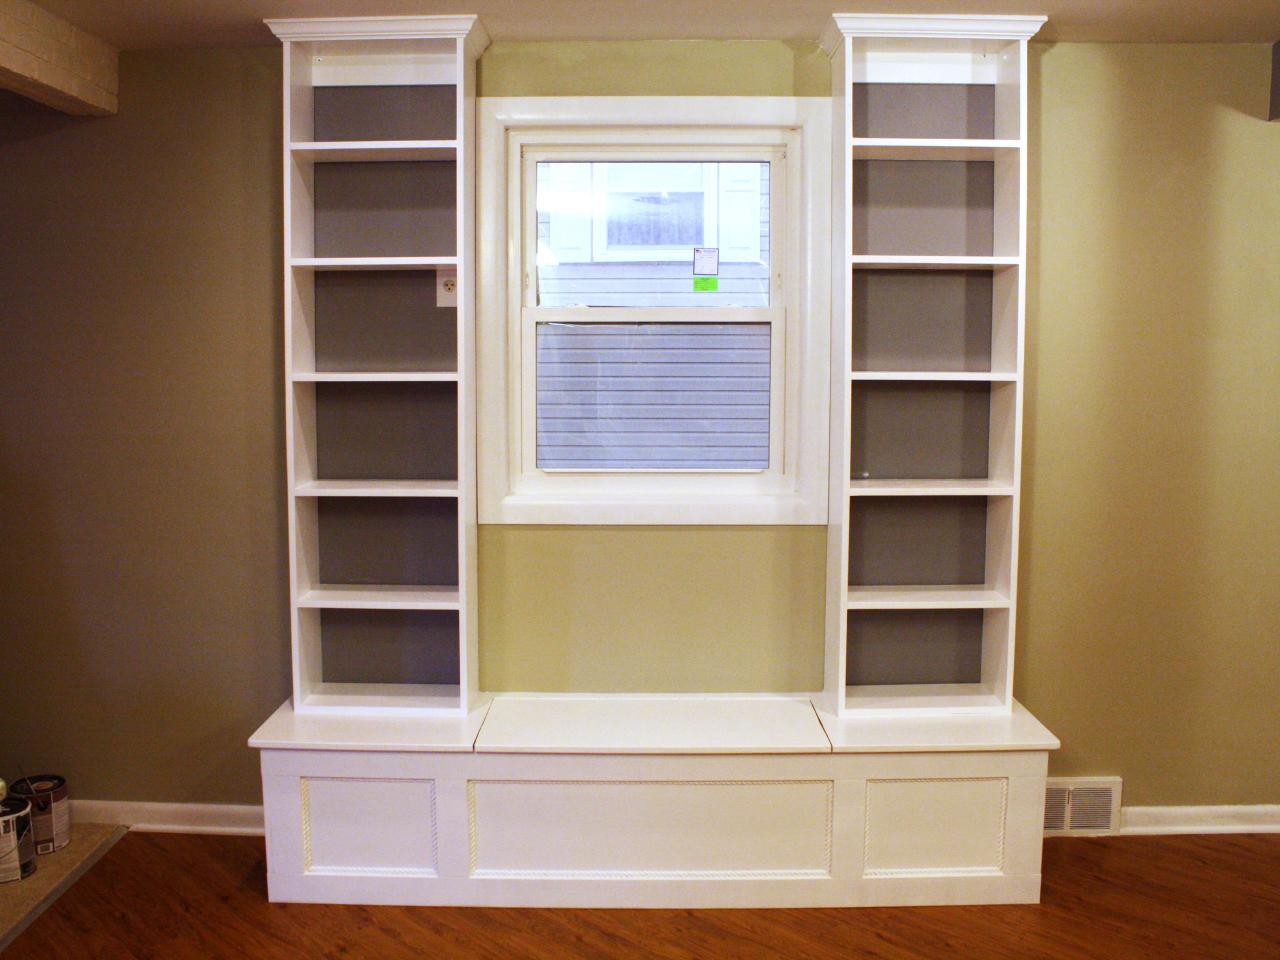 How To Build A Window Bench With Shelving How Tos Diy